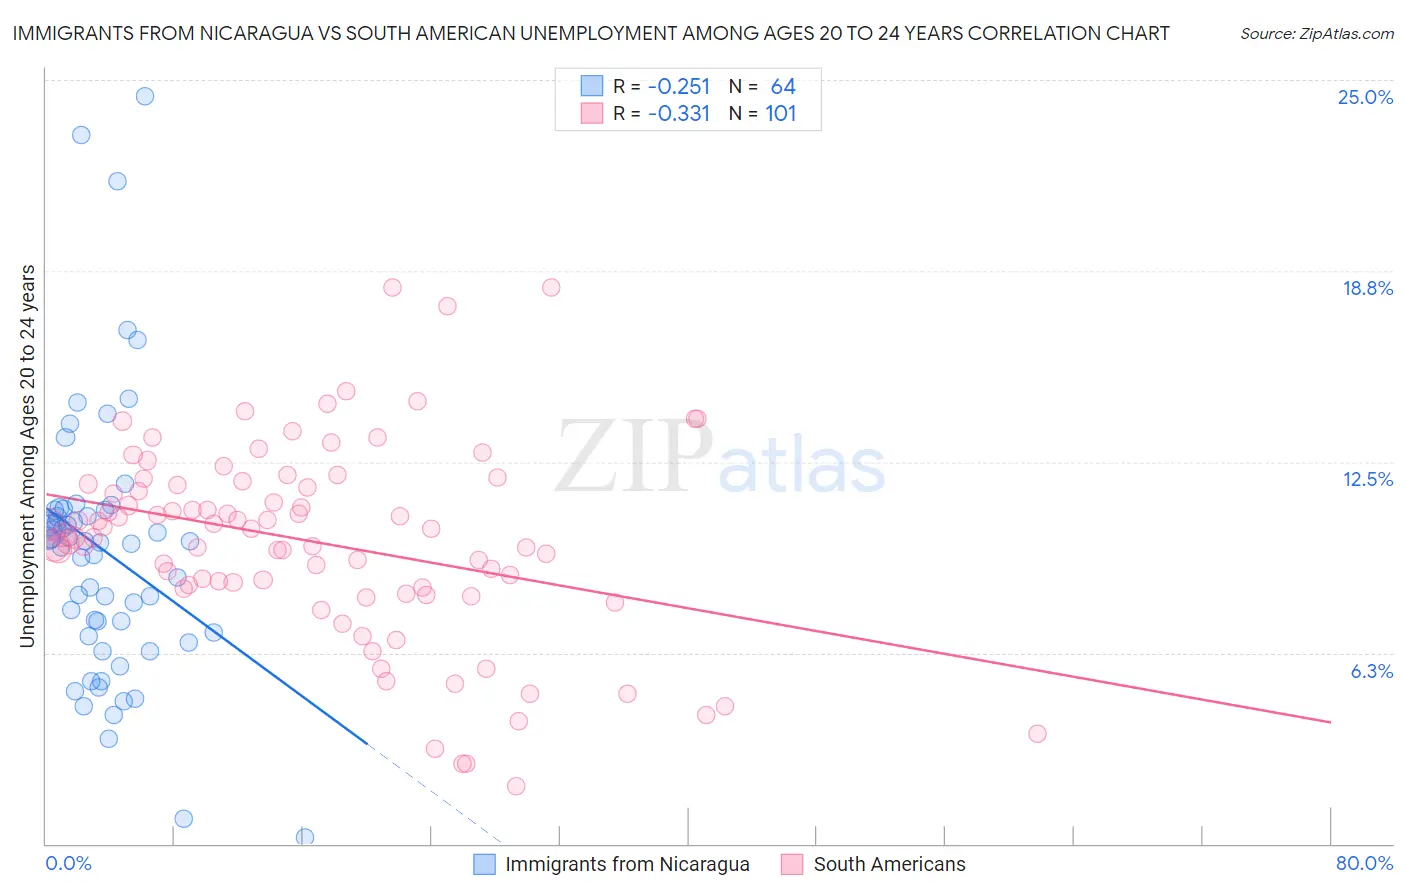 Immigrants from Nicaragua vs South American Unemployment Among Ages 20 to 24 years